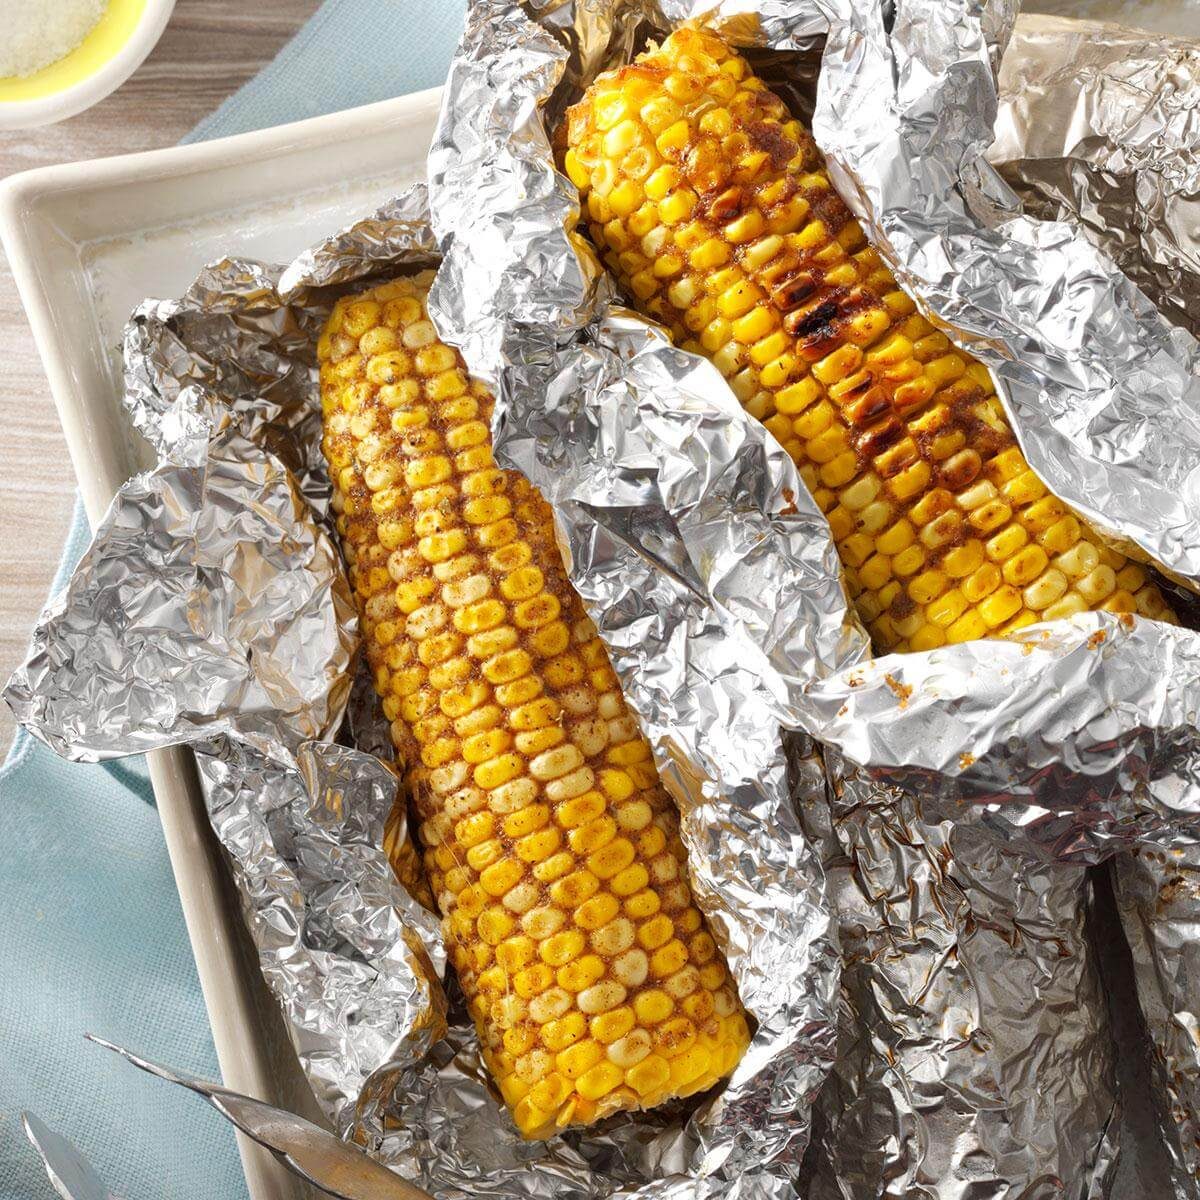 Is It Safe to Cook with Aluminum Foil?